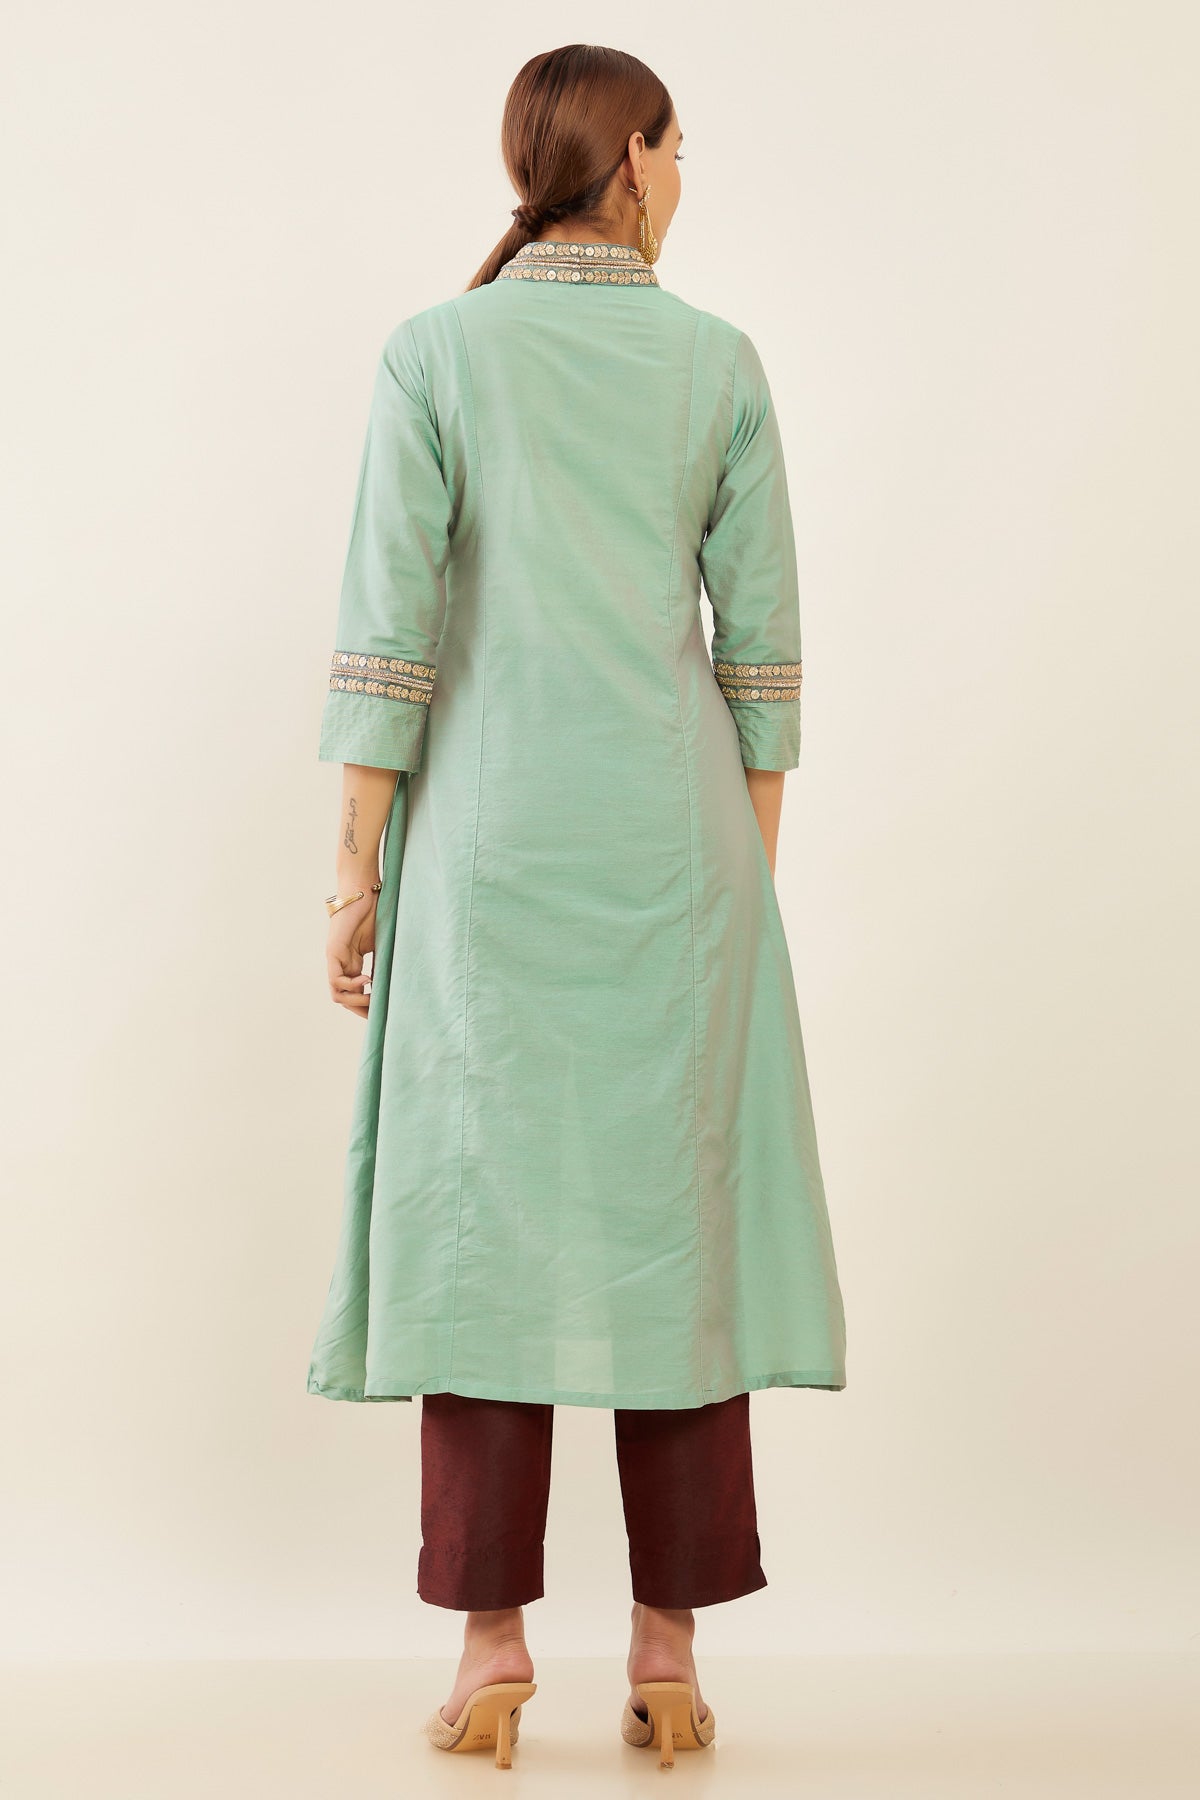 Gold Embellished Placket With Solid Kurta - Green